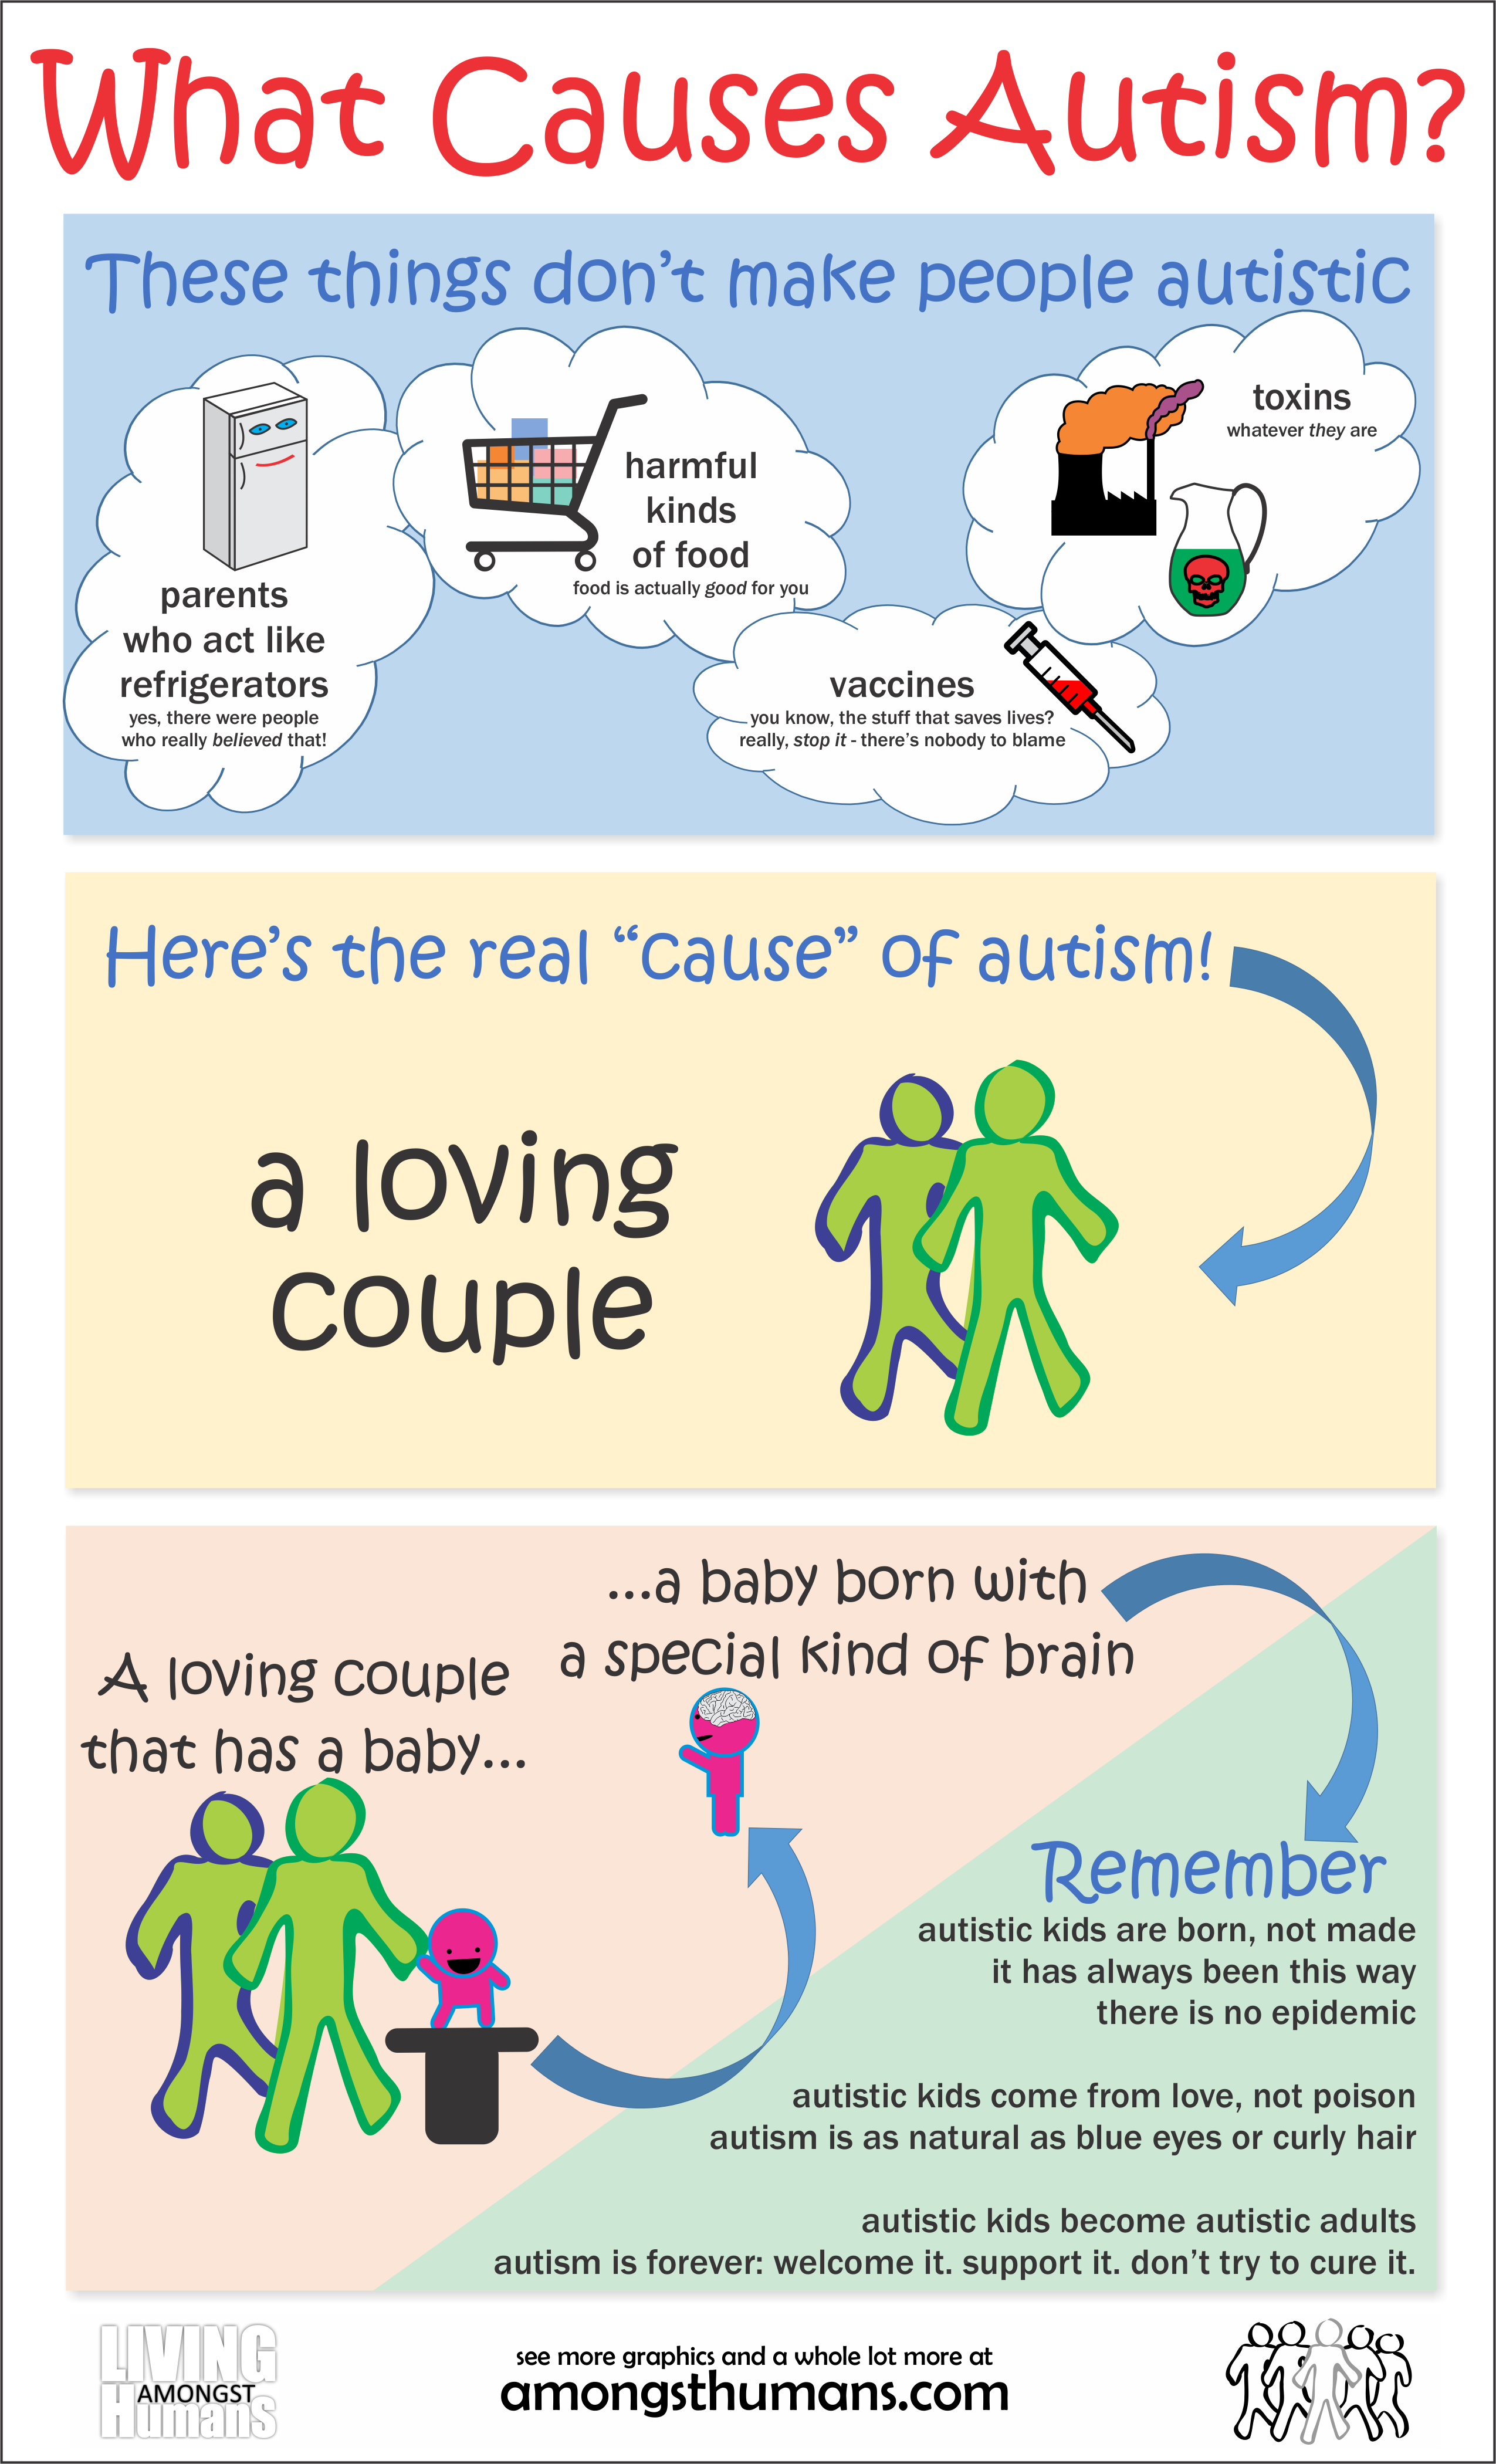 What Causes Autism - Infographic